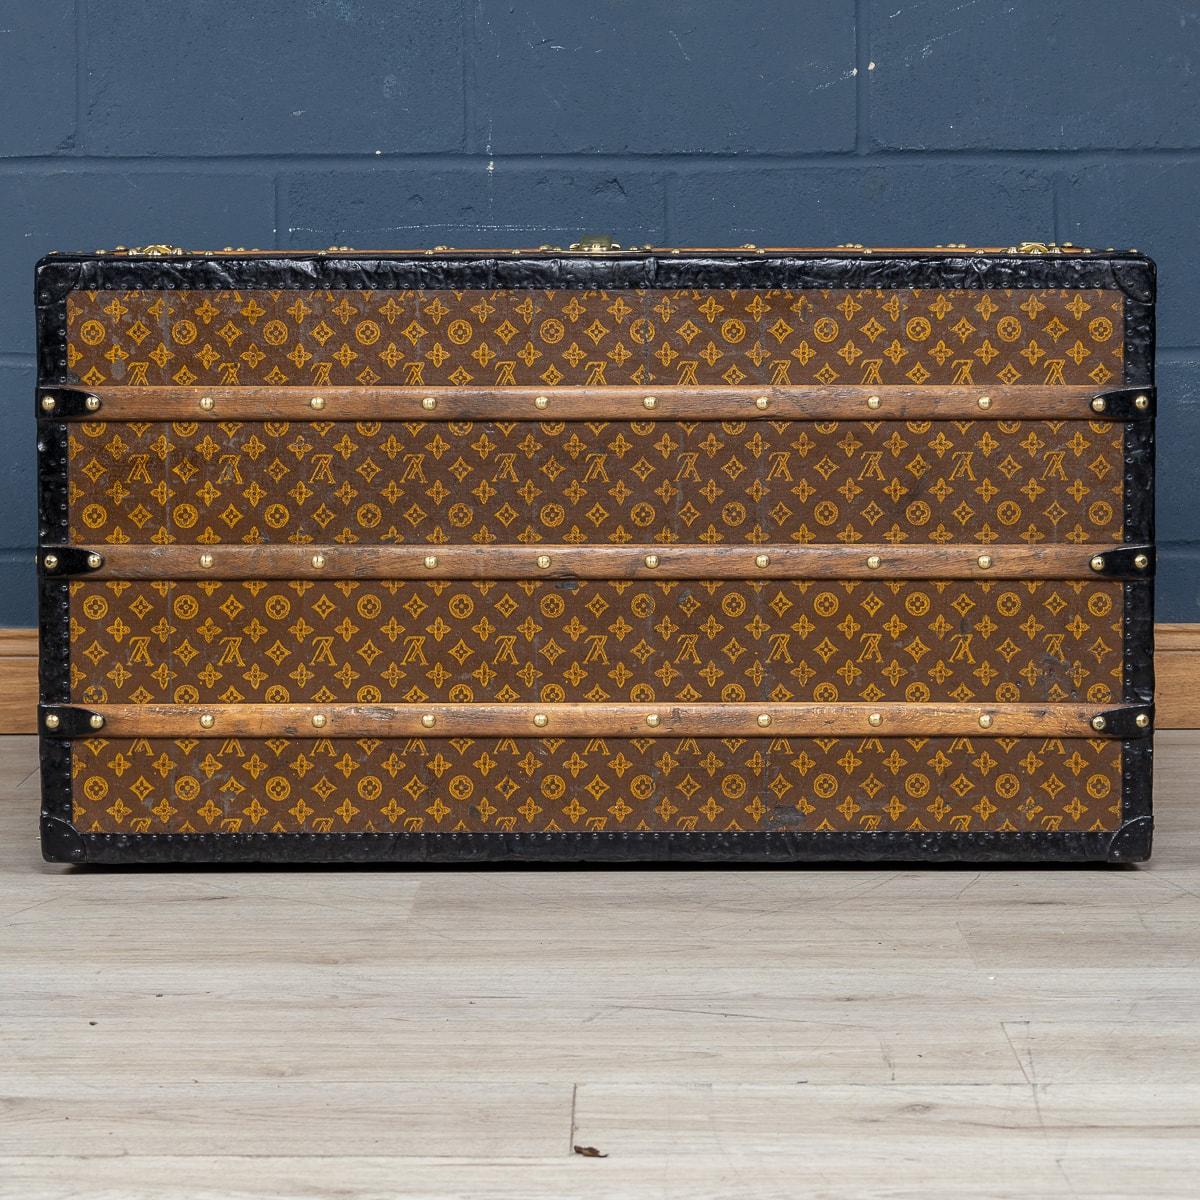 Brass 20th Century Louis Vuitton Courier Trunk In Monogram Canvas, France c.1900 For Sale